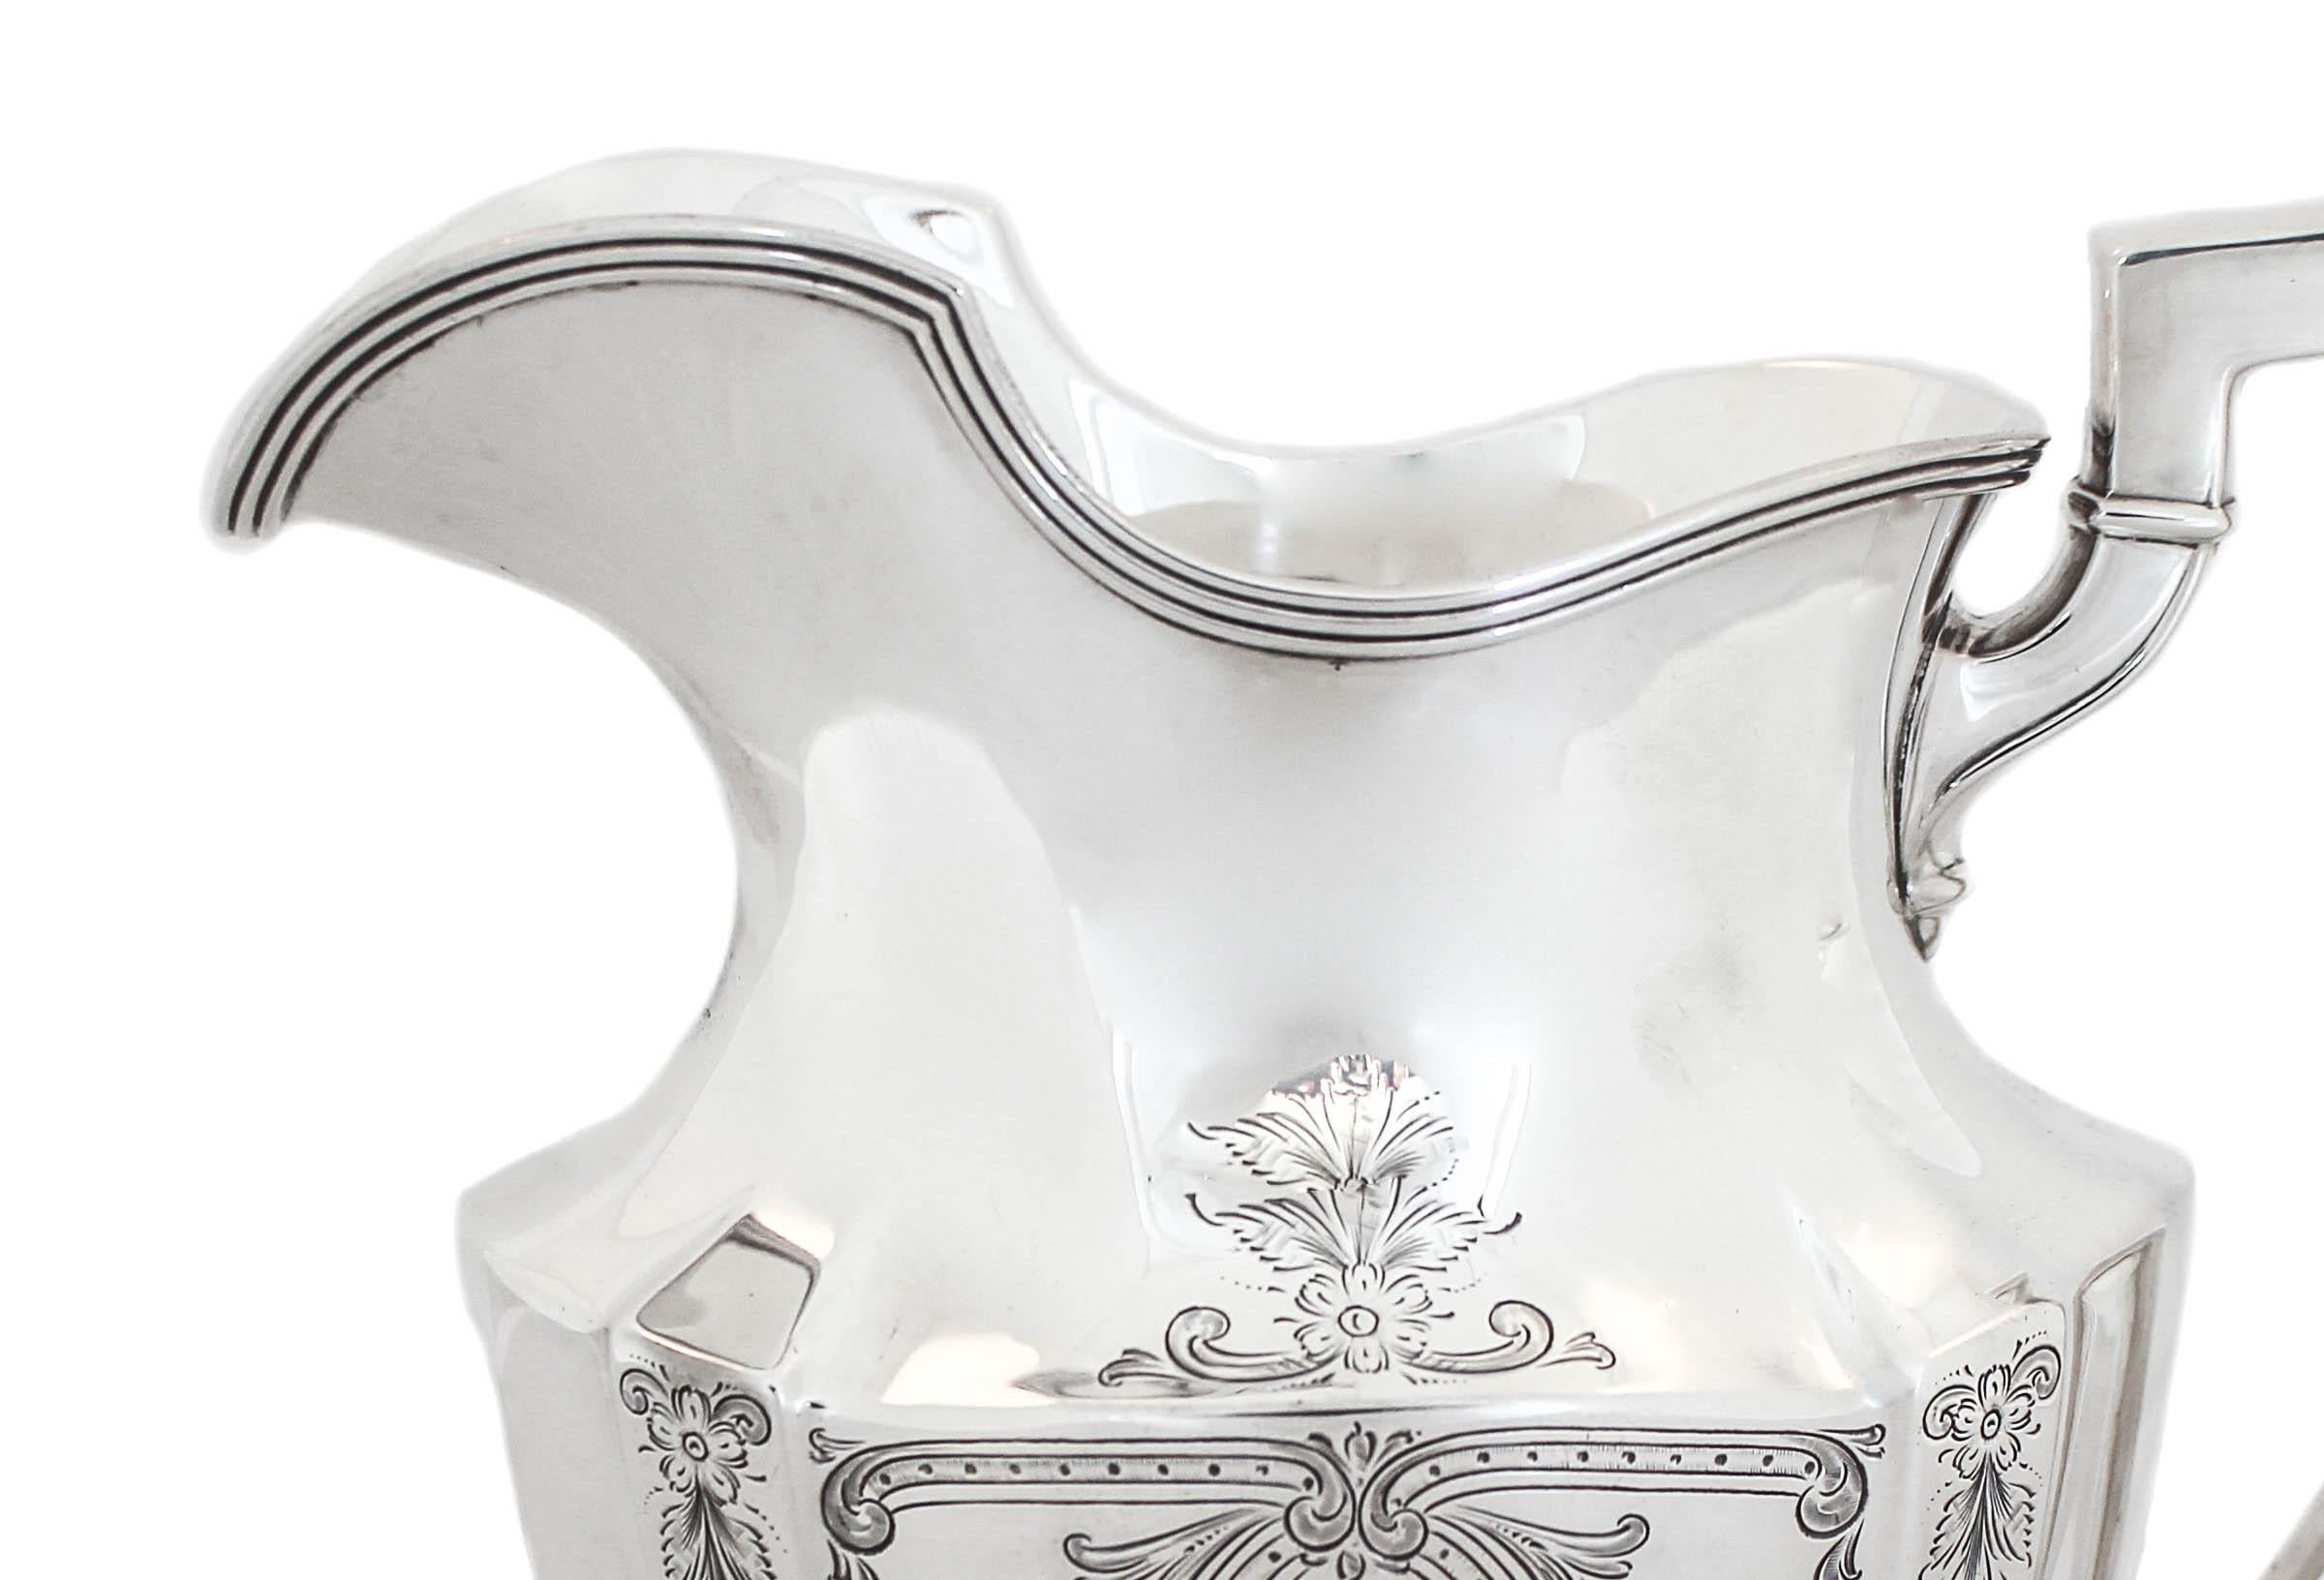 We are delighted to offer you this sterling silver water pitcher by Gorham Silversmiths, hallmarked 1928. The pattern is the iconic “Plymouth” only this one is engraved (Plymouth, engraved). It has that distinctive shape that’s synonymous with